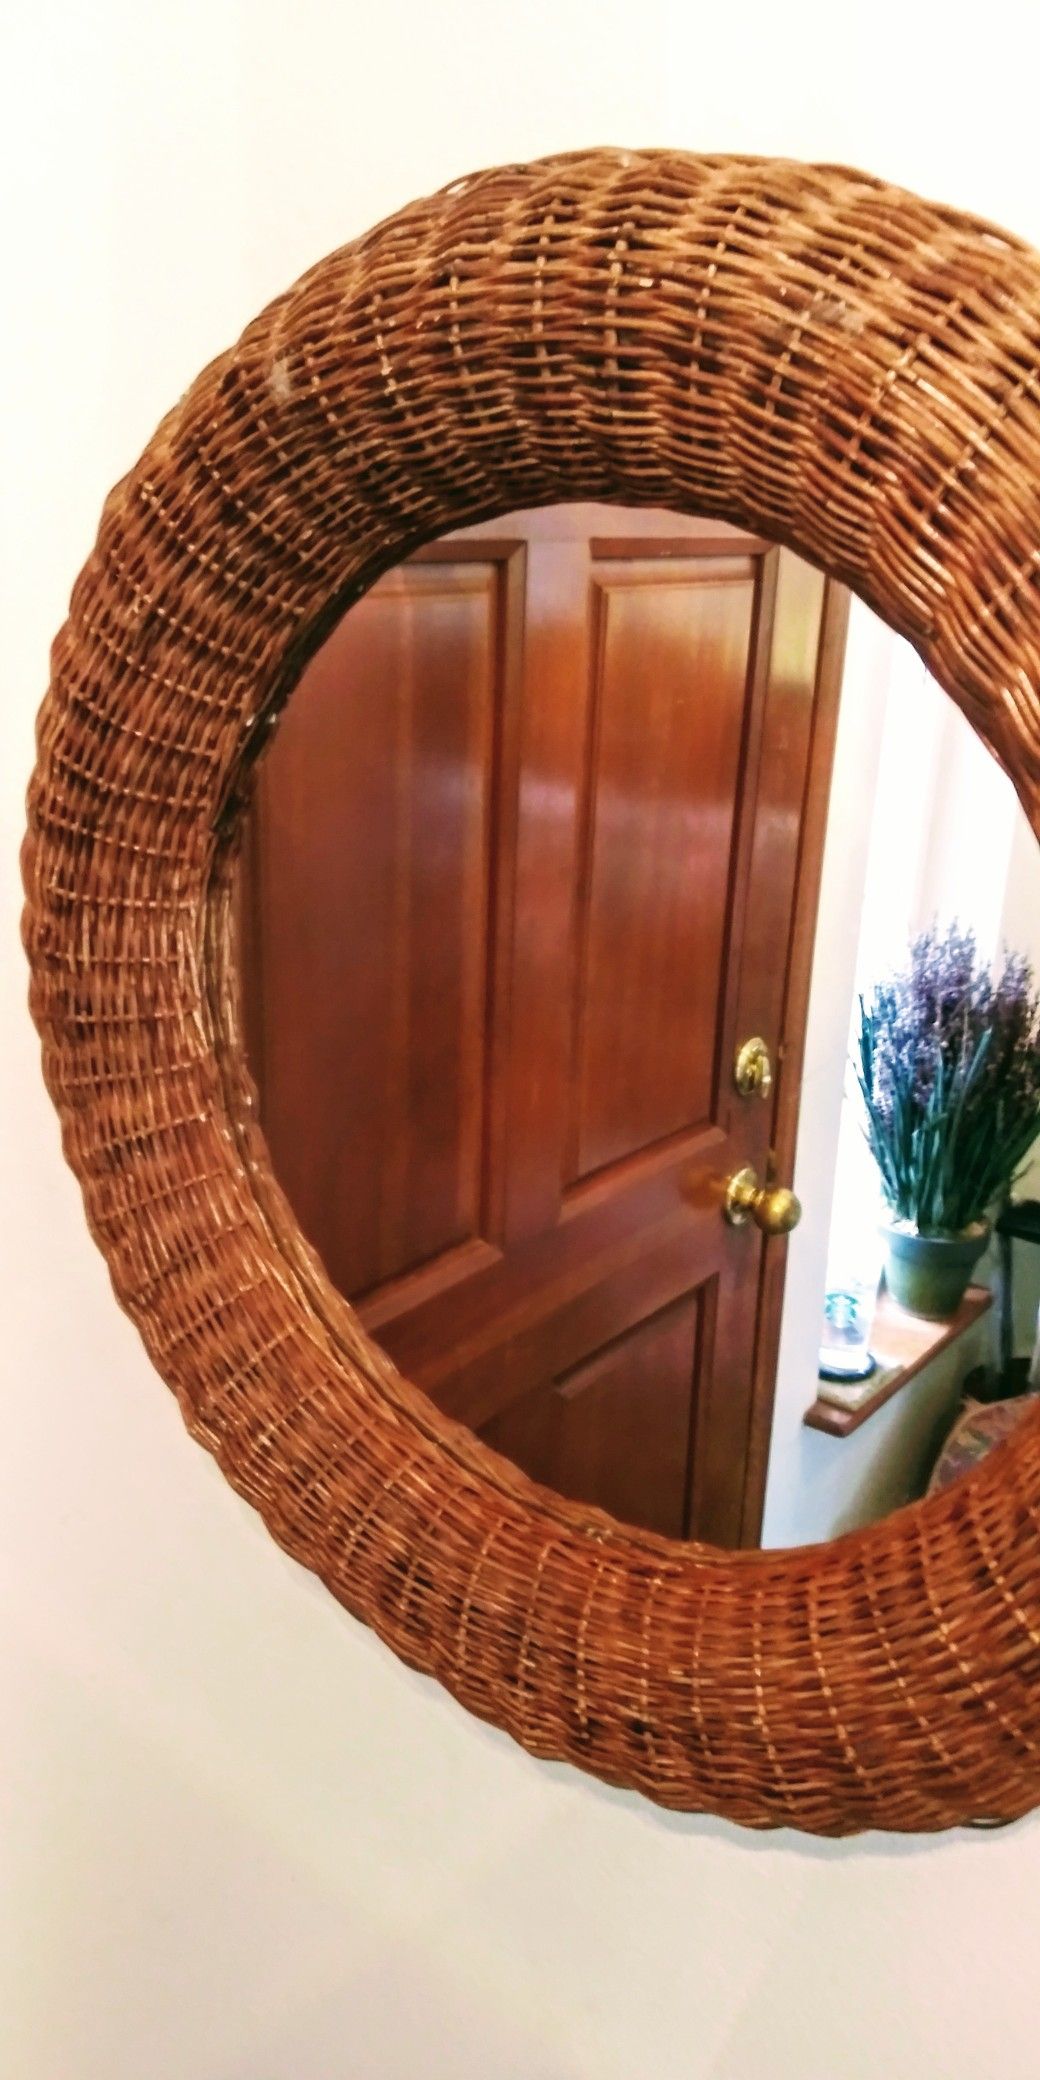 Wall Decor Mirror s $5&up. Lots of Rustic Beach Nautical Bentwood Bamboo Rattan Wicker Wood RARE Drop Leaf Tavern Dining Table w/Drawer, Chairs & ⬇️